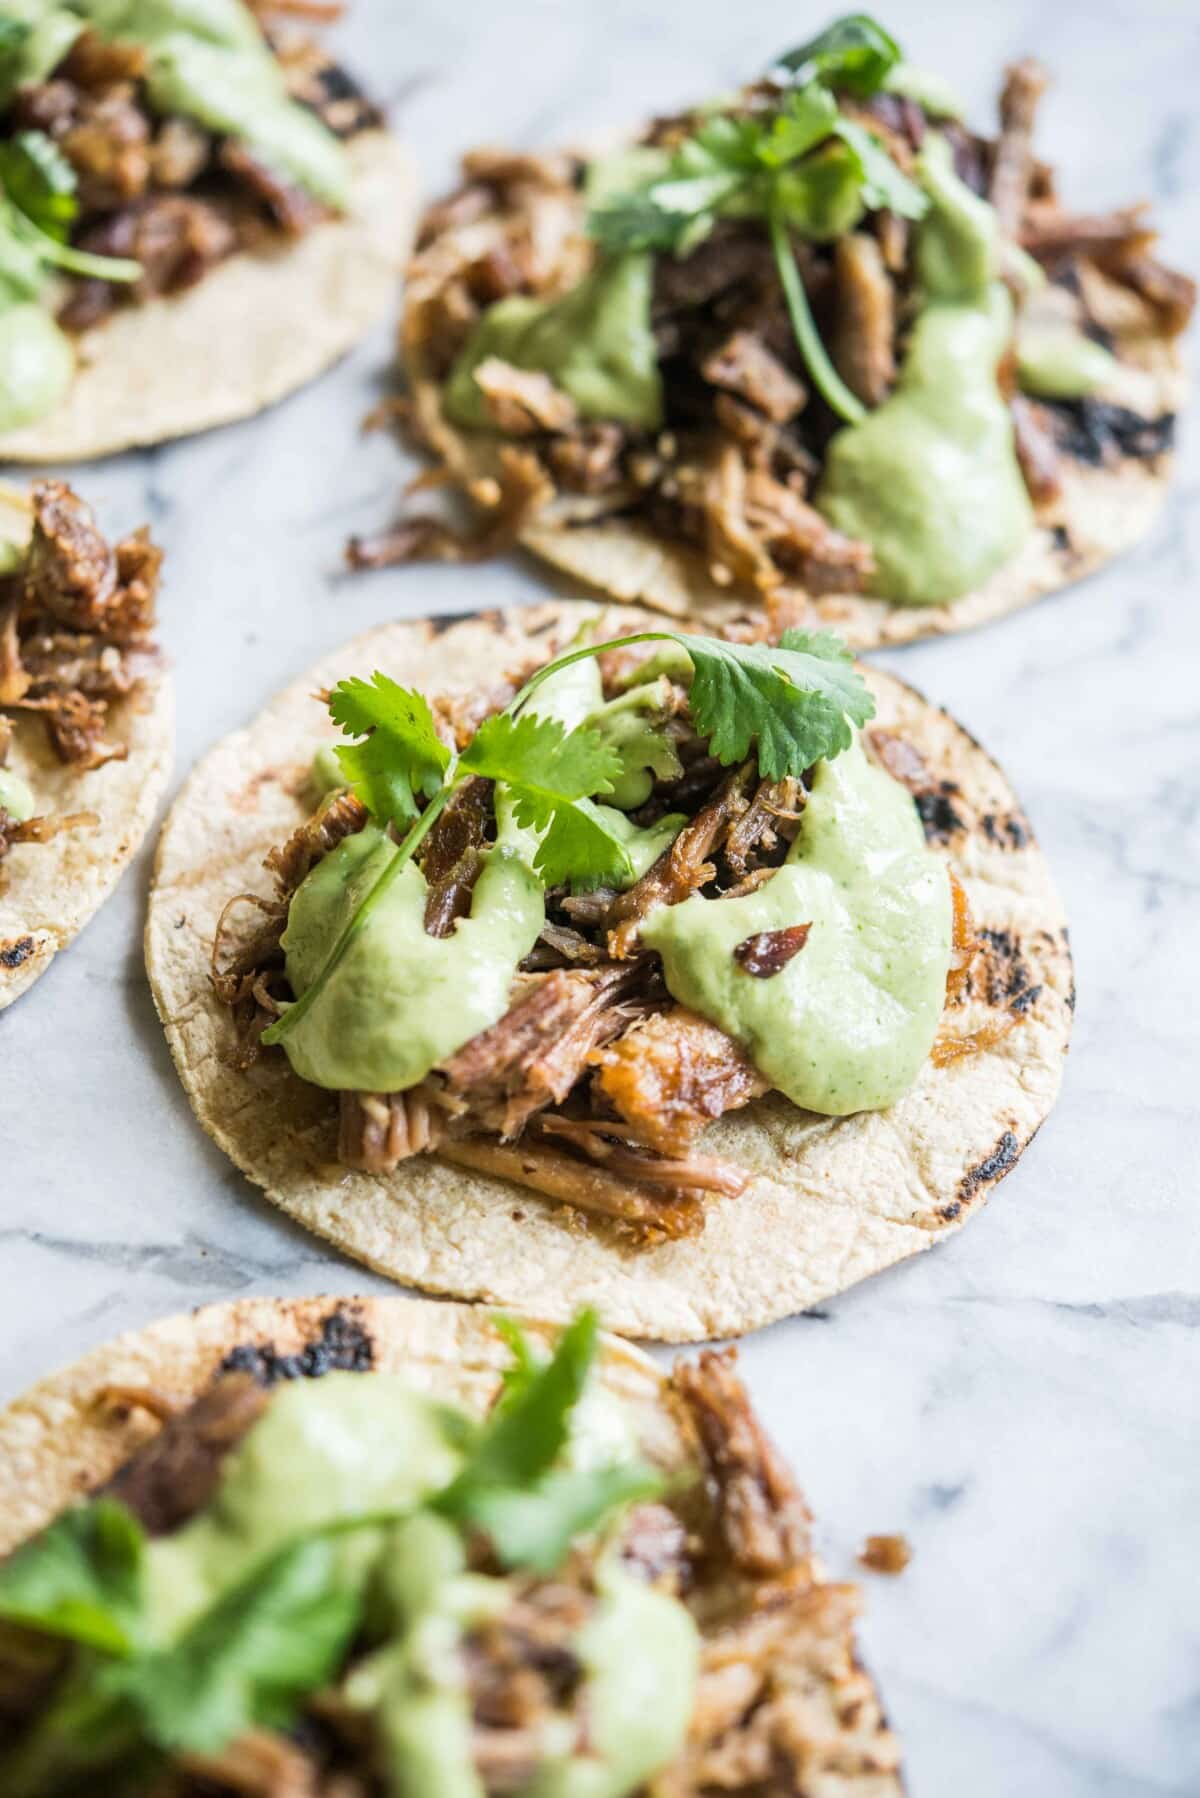 carnitas on corn tortillas topped with creamy green salsa verde and garnished with cilantro